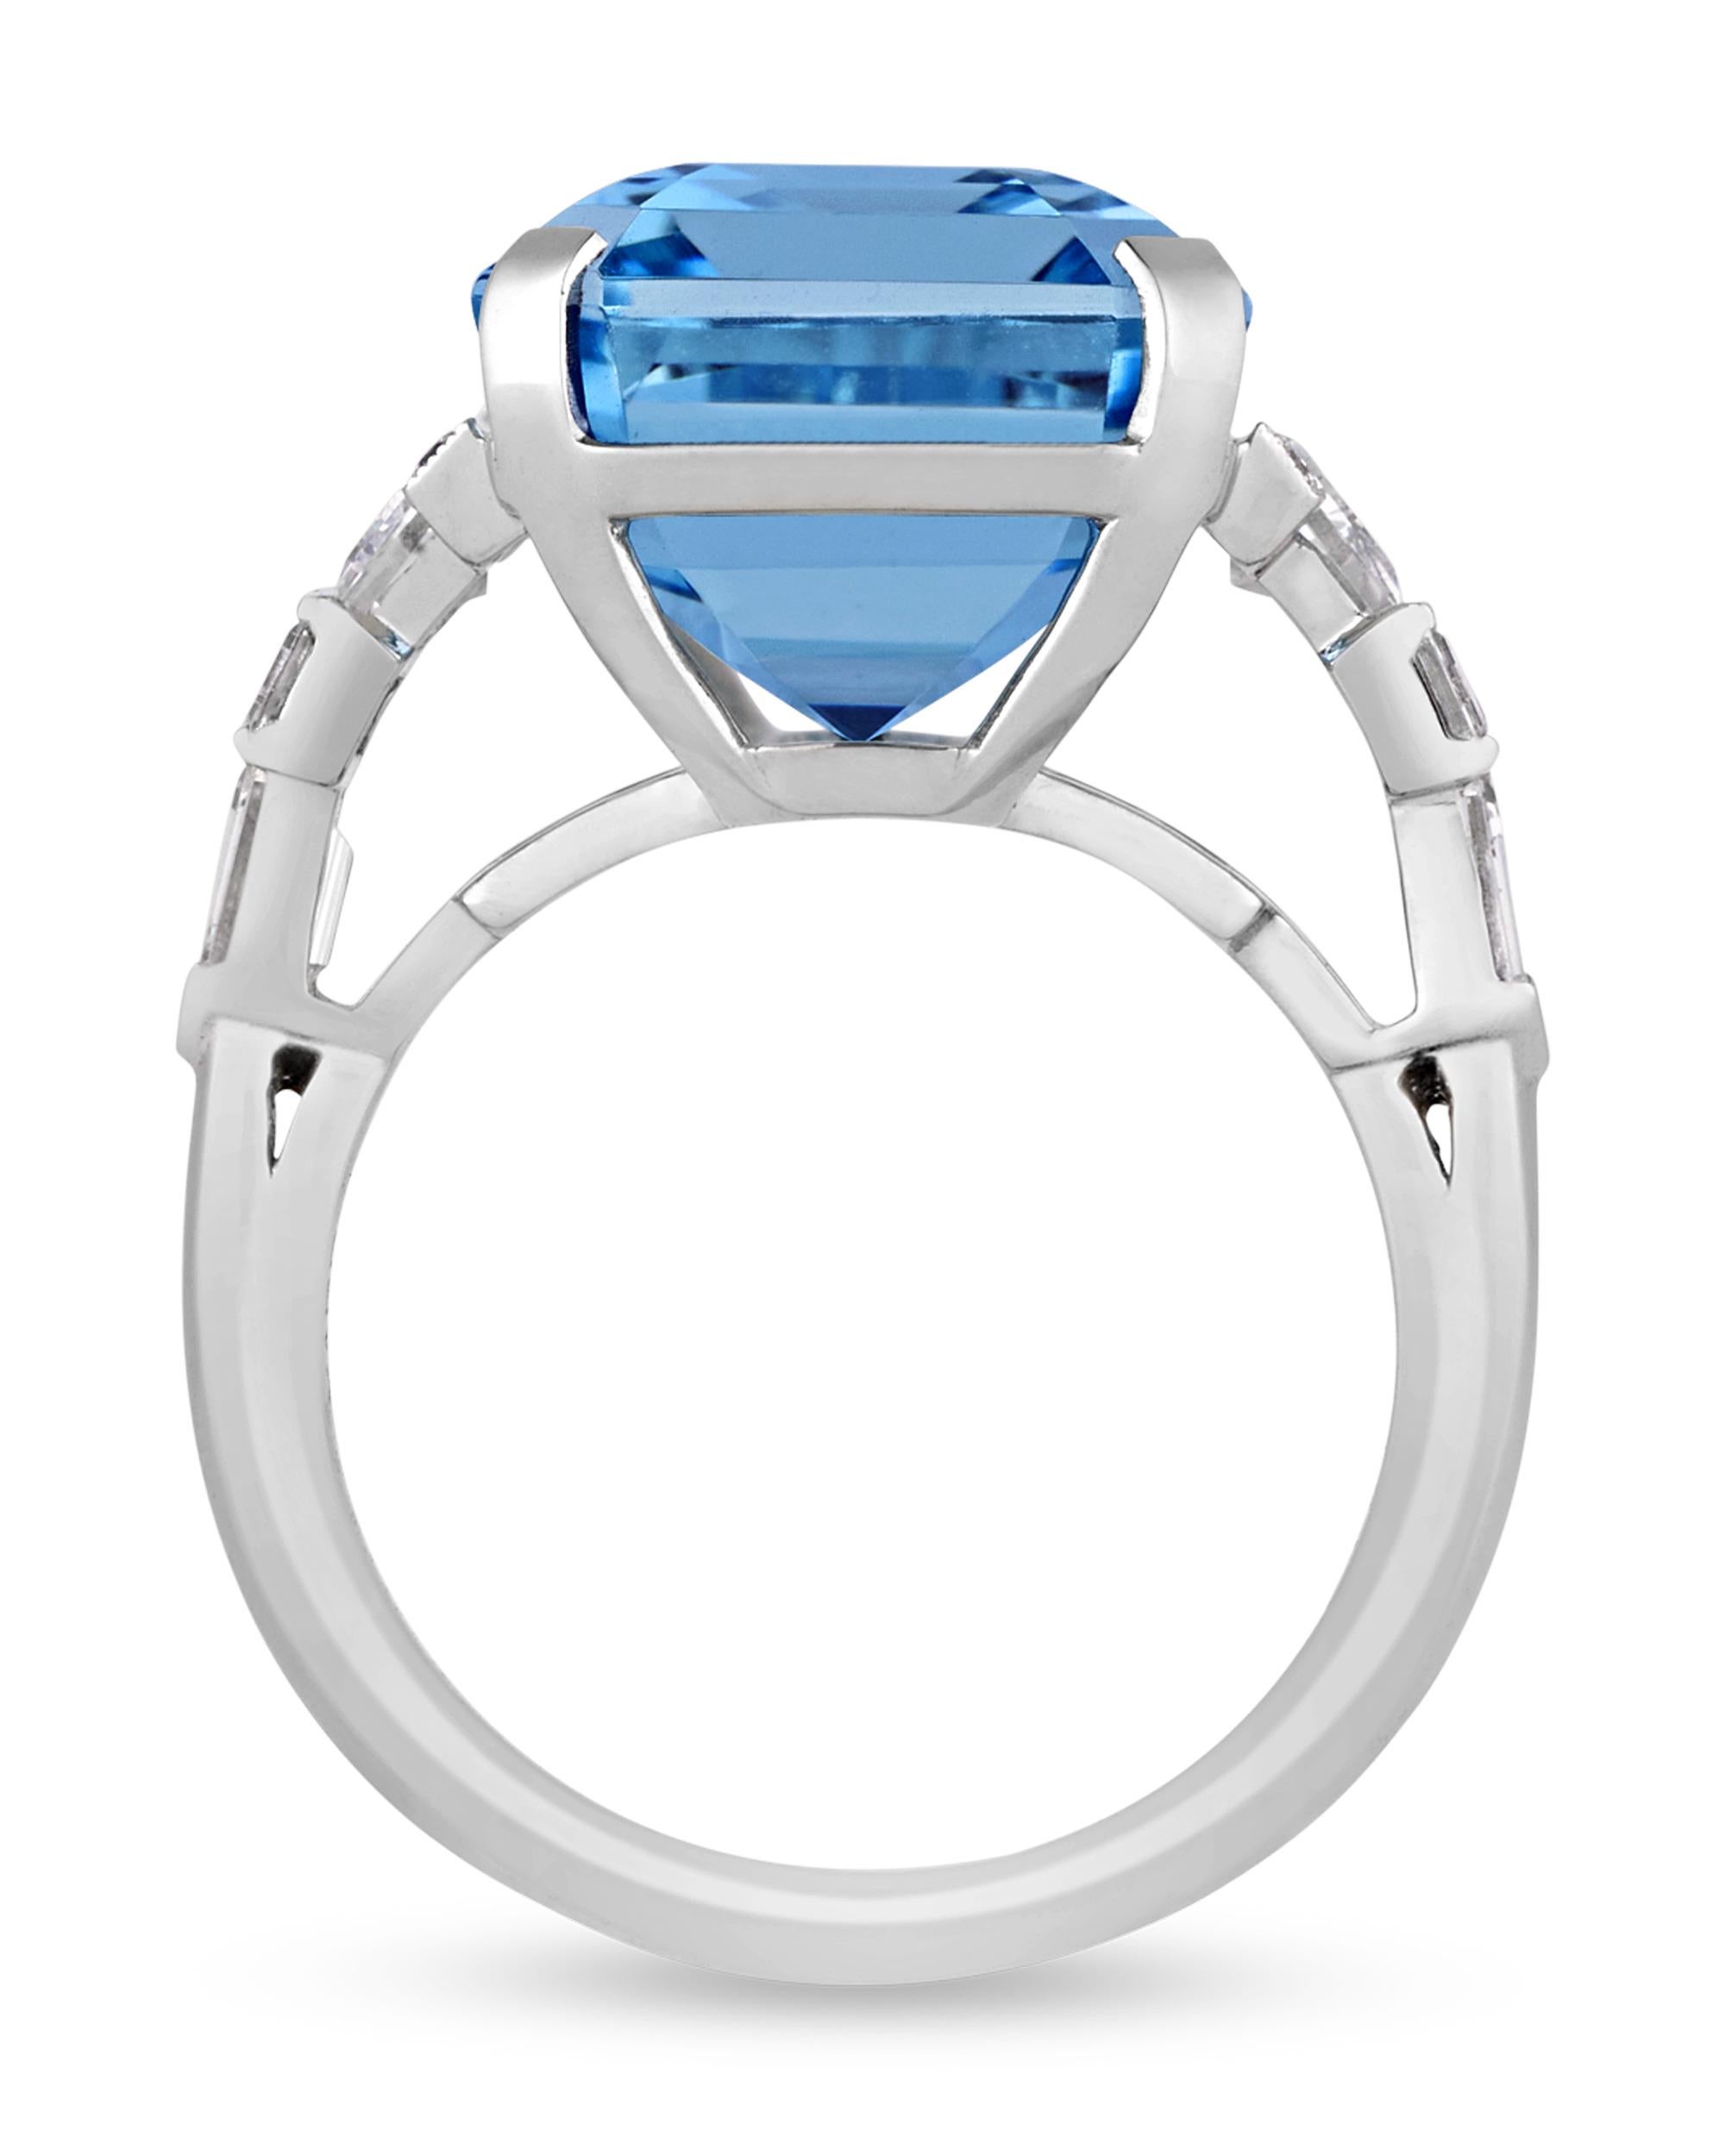 This exquisite ring by celebrated jeweler Raymond Yard features a breathtaking 13.35-carat emerald-cut aquamarine. The striking blue gemstone is accented by a combination of trapeze, bullet, square and round diamonds totaling 1.53 carats. The gems